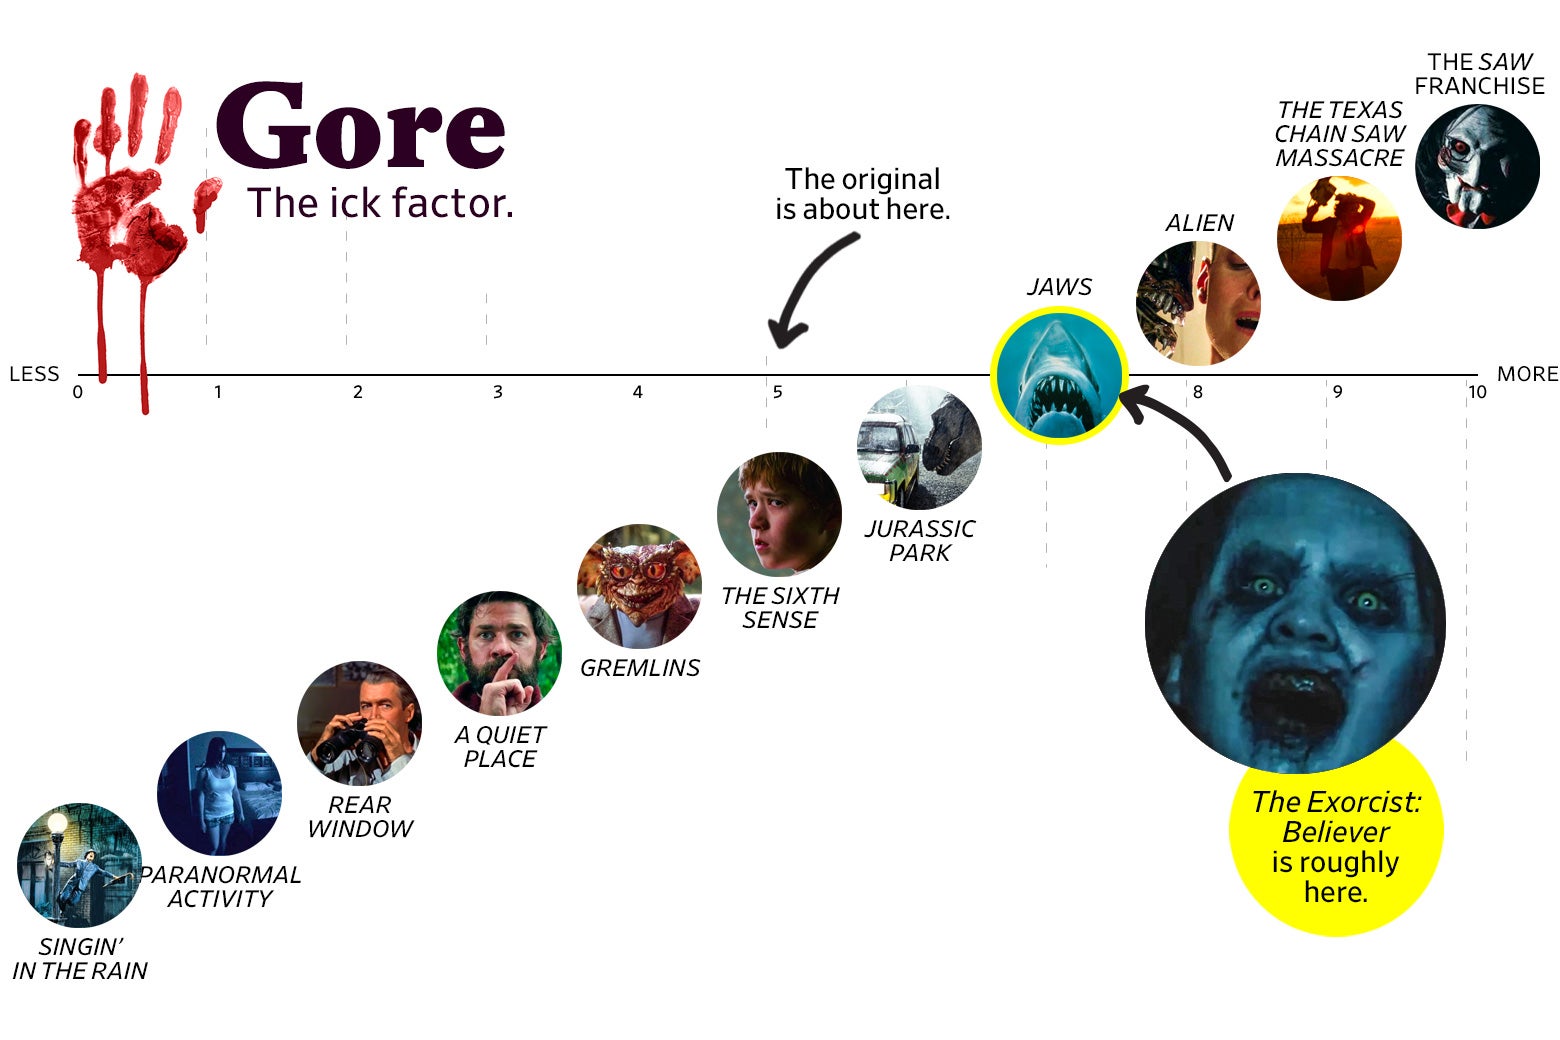 A chart titled “Gore: The Ick Factor” shows that The Exorcist: Believer ranks a 7 in gore, roughly the same as Jaws, while the original ranks a 5, roughly the same as The Sixth Sense. The scale ranges from Singin’ in the Rain (0) to the Saw Franchise (10).